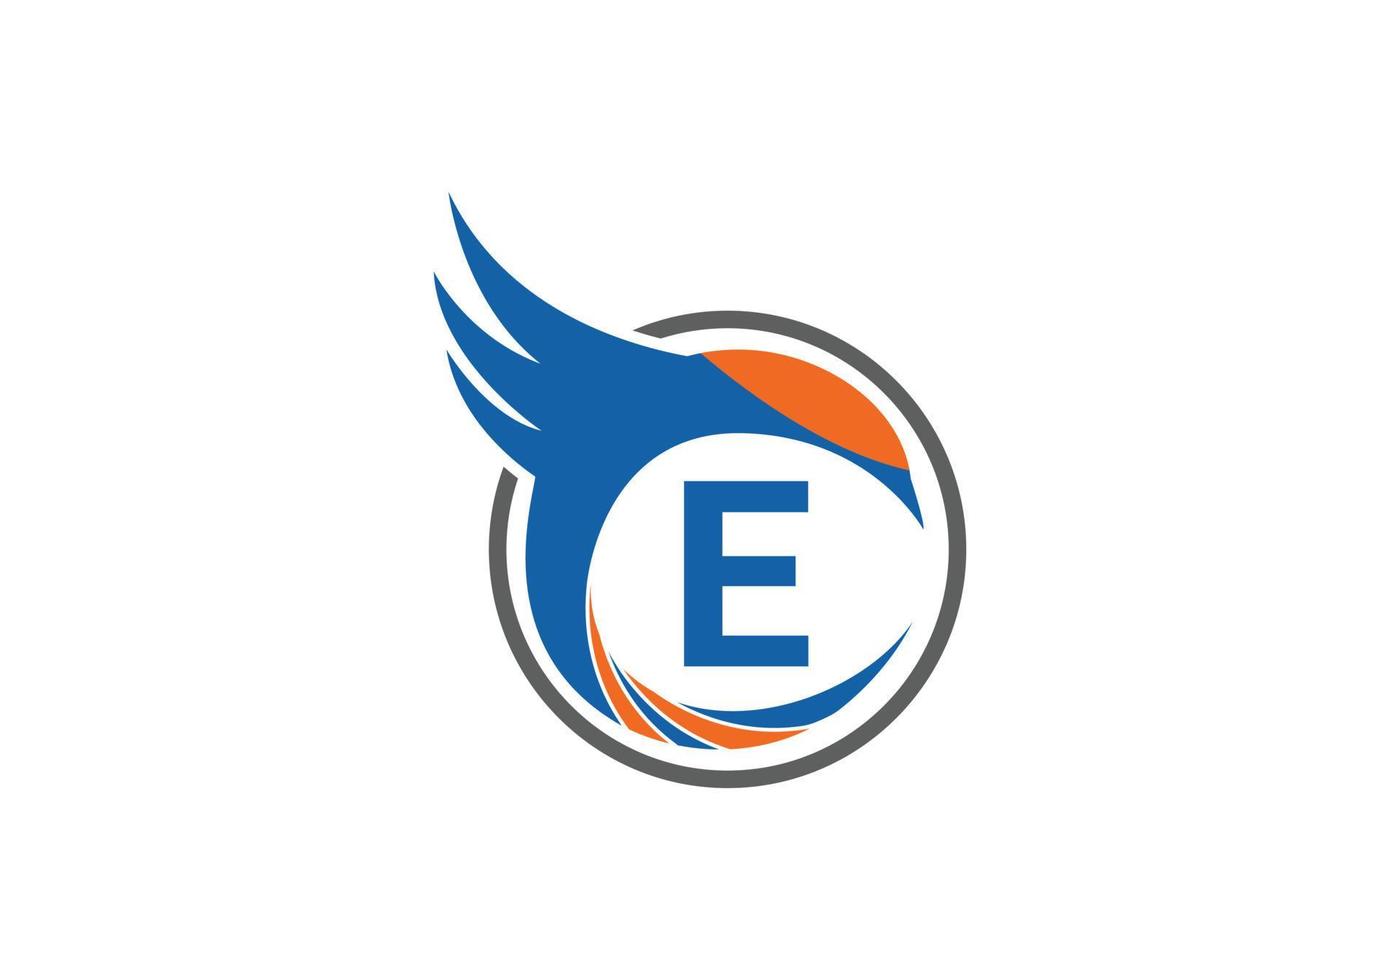 this is a letter E rounded logo design vector